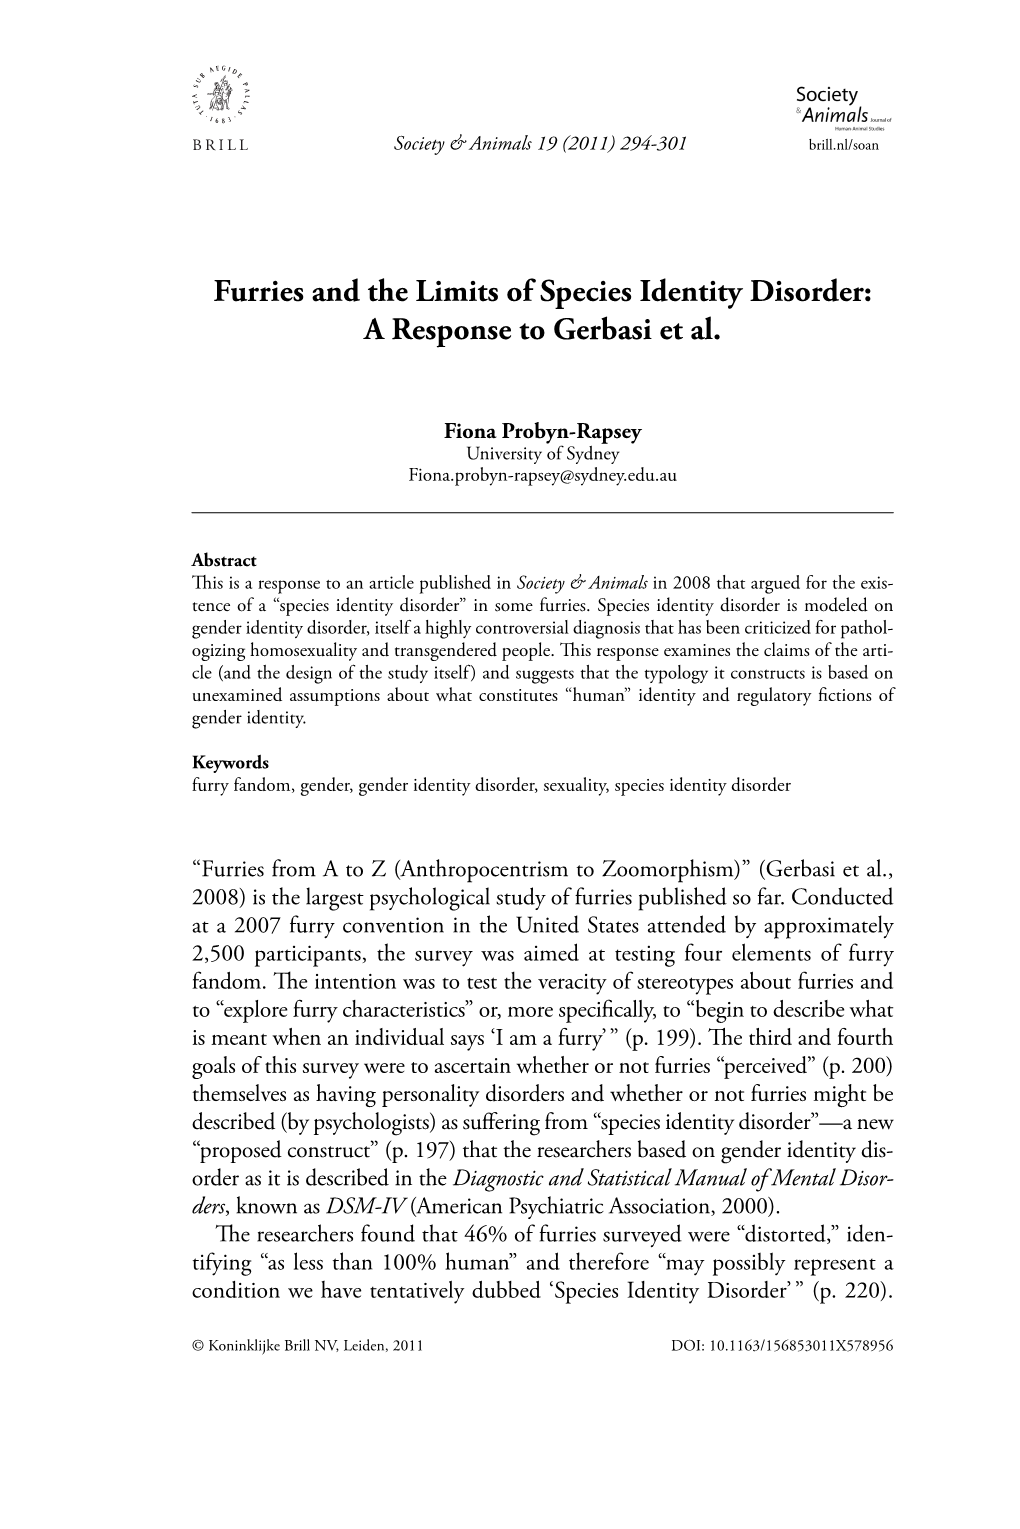 Furries and the Limits of Species Identity Disorder: a Response to Gerbasi Et Al